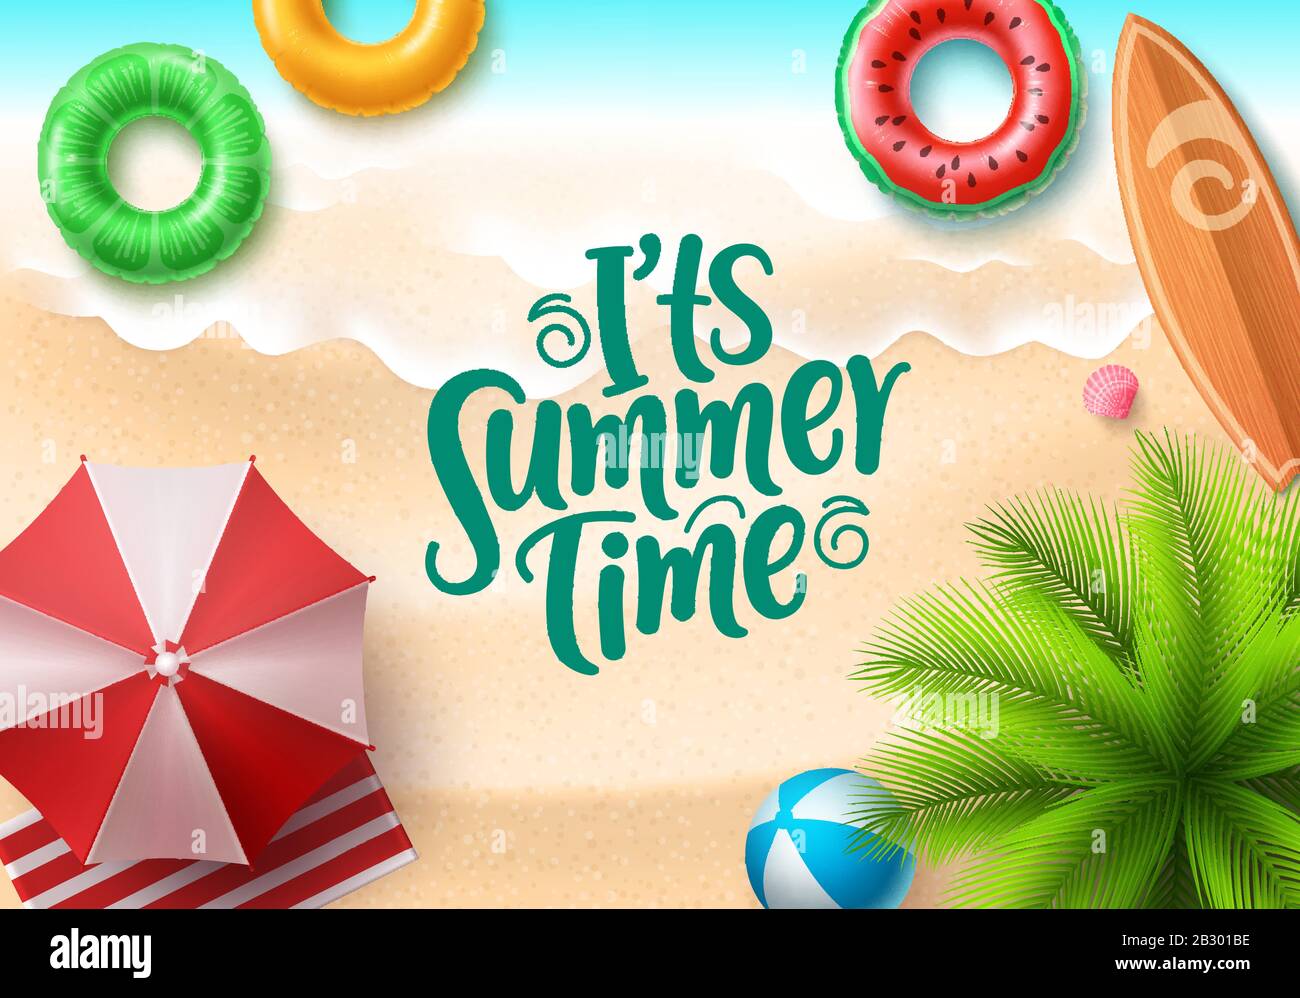 It's summer time vector banner design. Summer text in seaside top view background with colorful beach elements like floaters, surfboard, beach ball, Stock Vector